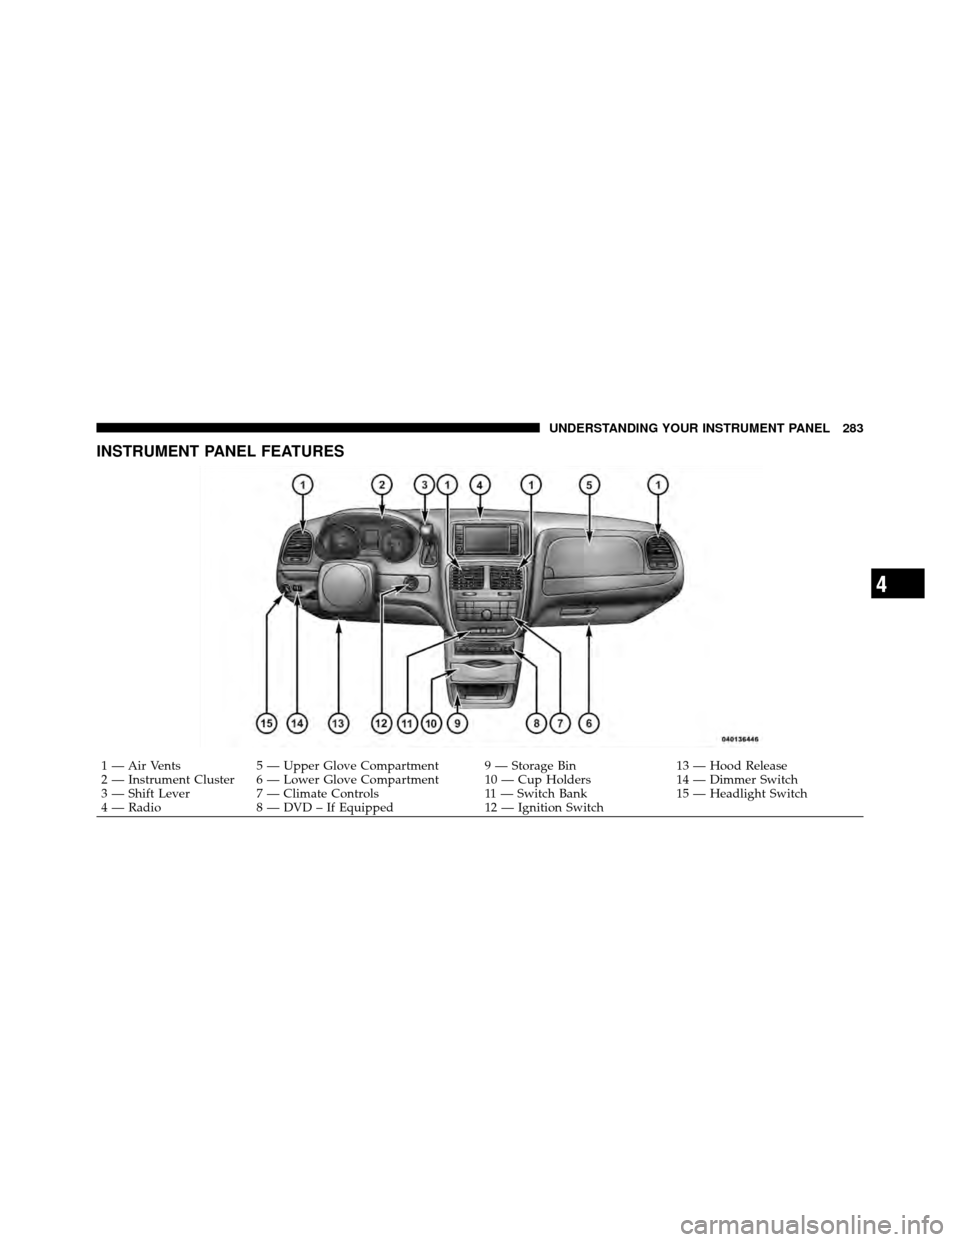 DODGE GRAND CARAVAN 2012 5.G Owners Manual INSTRUMENT PANEL FEATURES
1 — Air Vents5 — Upper Glove Compartment 9 — Storage Bin 13 — Hood Release
2 — Instrument Cluster 6 — Lower Glove Compartment 10 — Cup Holders 14 — Dimmer Swi